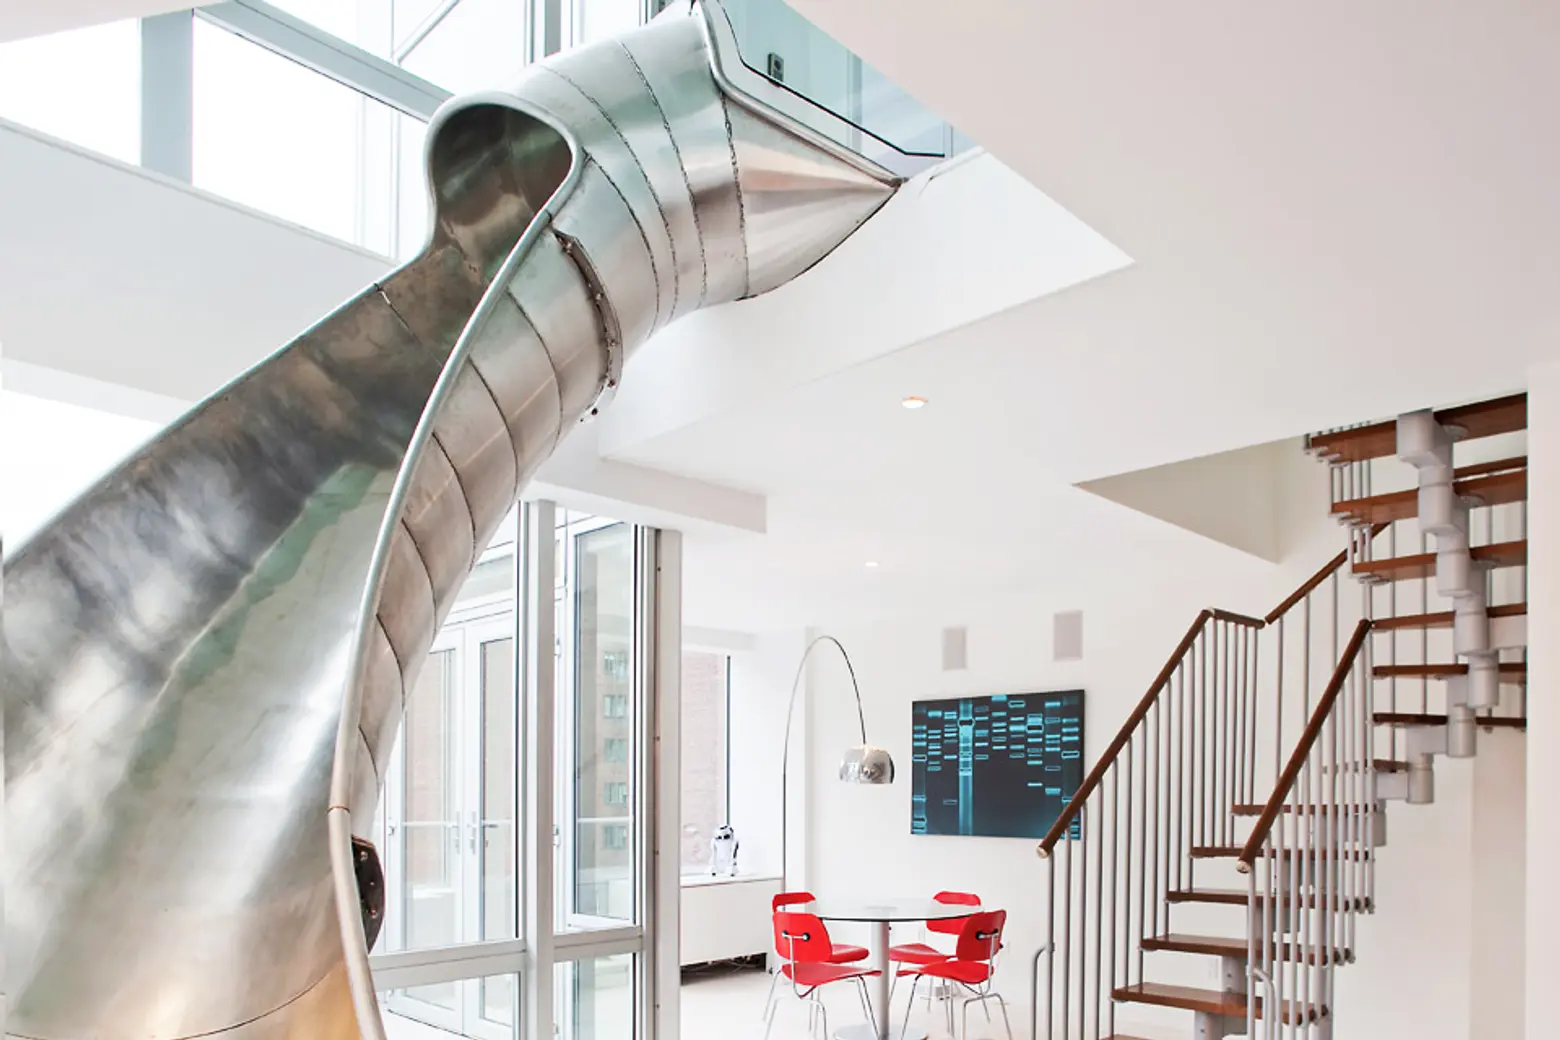 Live Out Your Childhood Fantasies in This East Village Home with a Metal Slide by Turett Architects